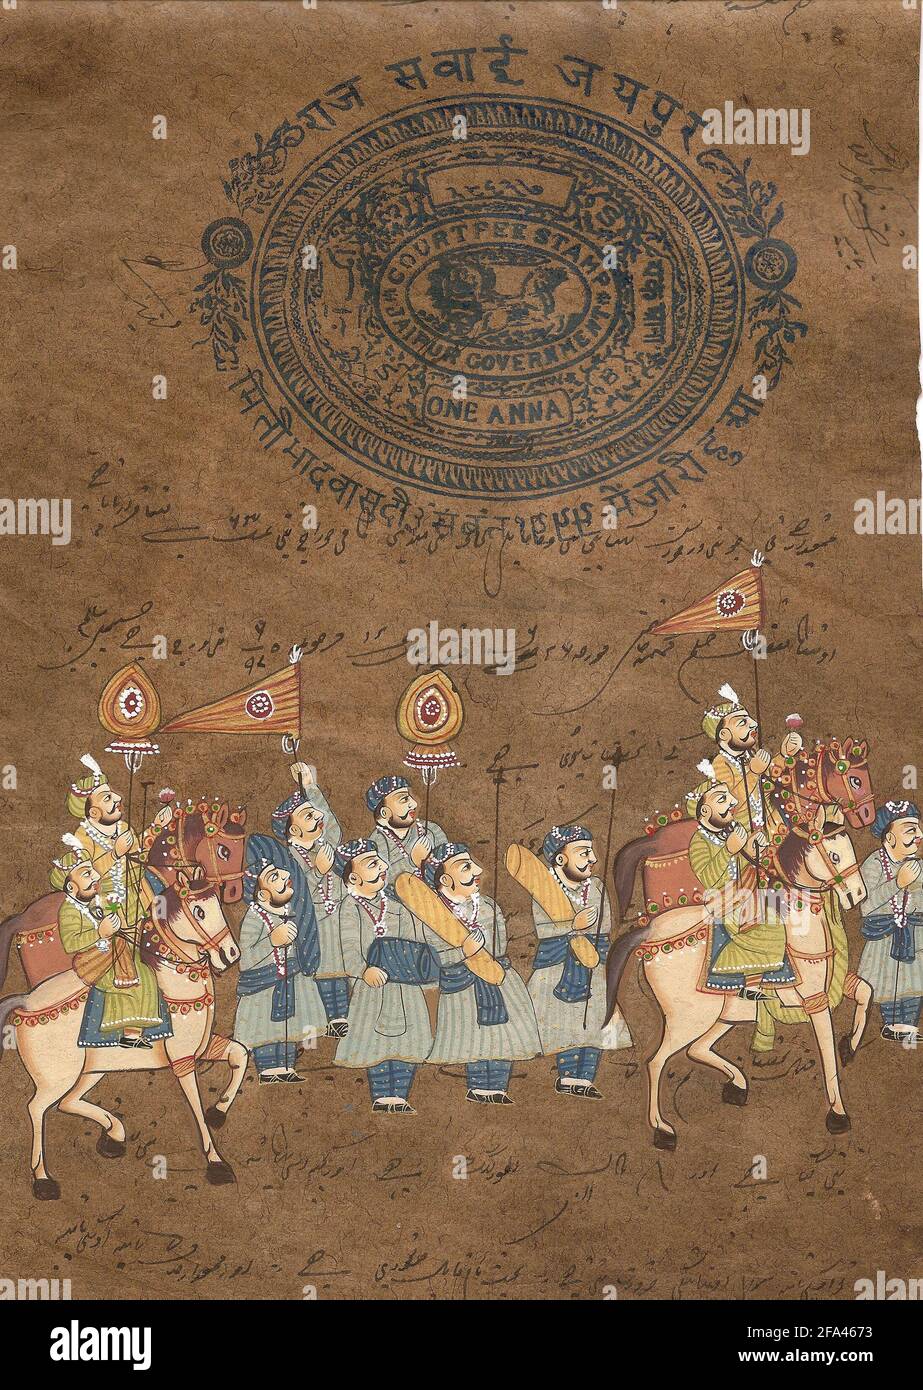 Procession of maharajah on horse, Indian miniature painting on 19th century paper. Udaipur, India Stock Photo